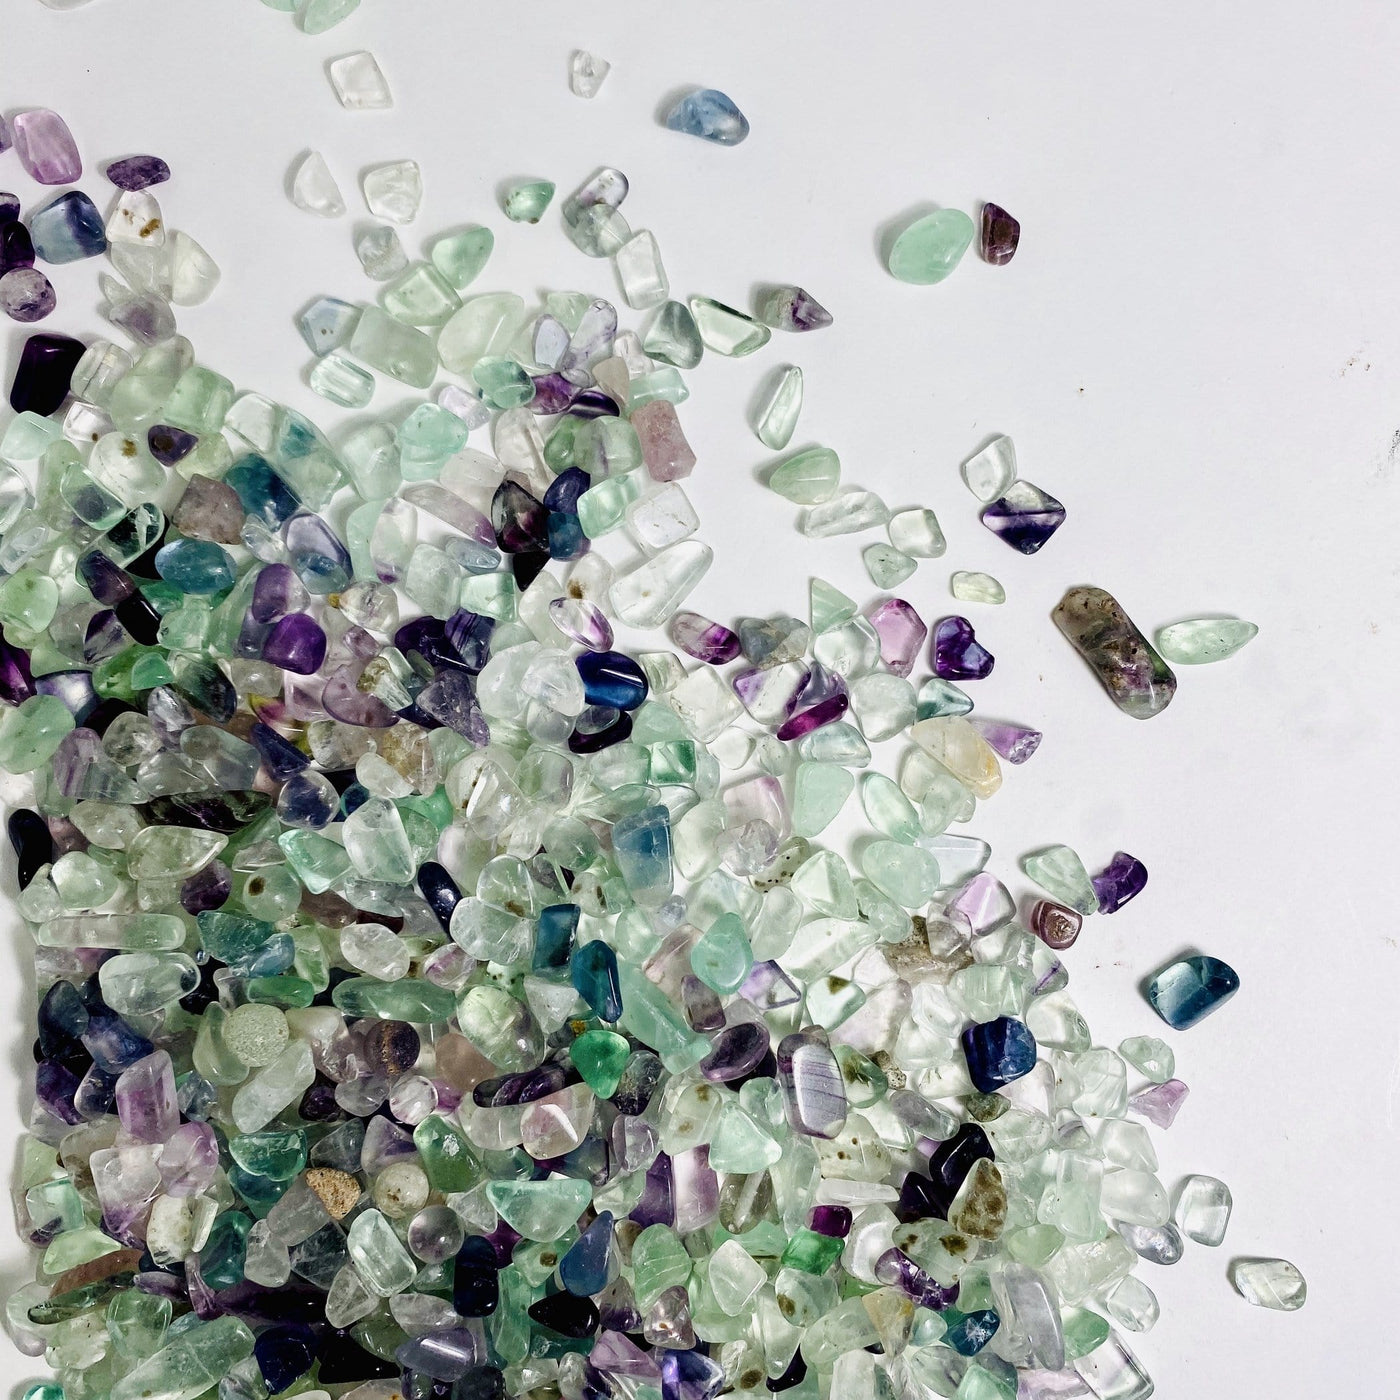 fluorite chips in green purple and blue on a white background